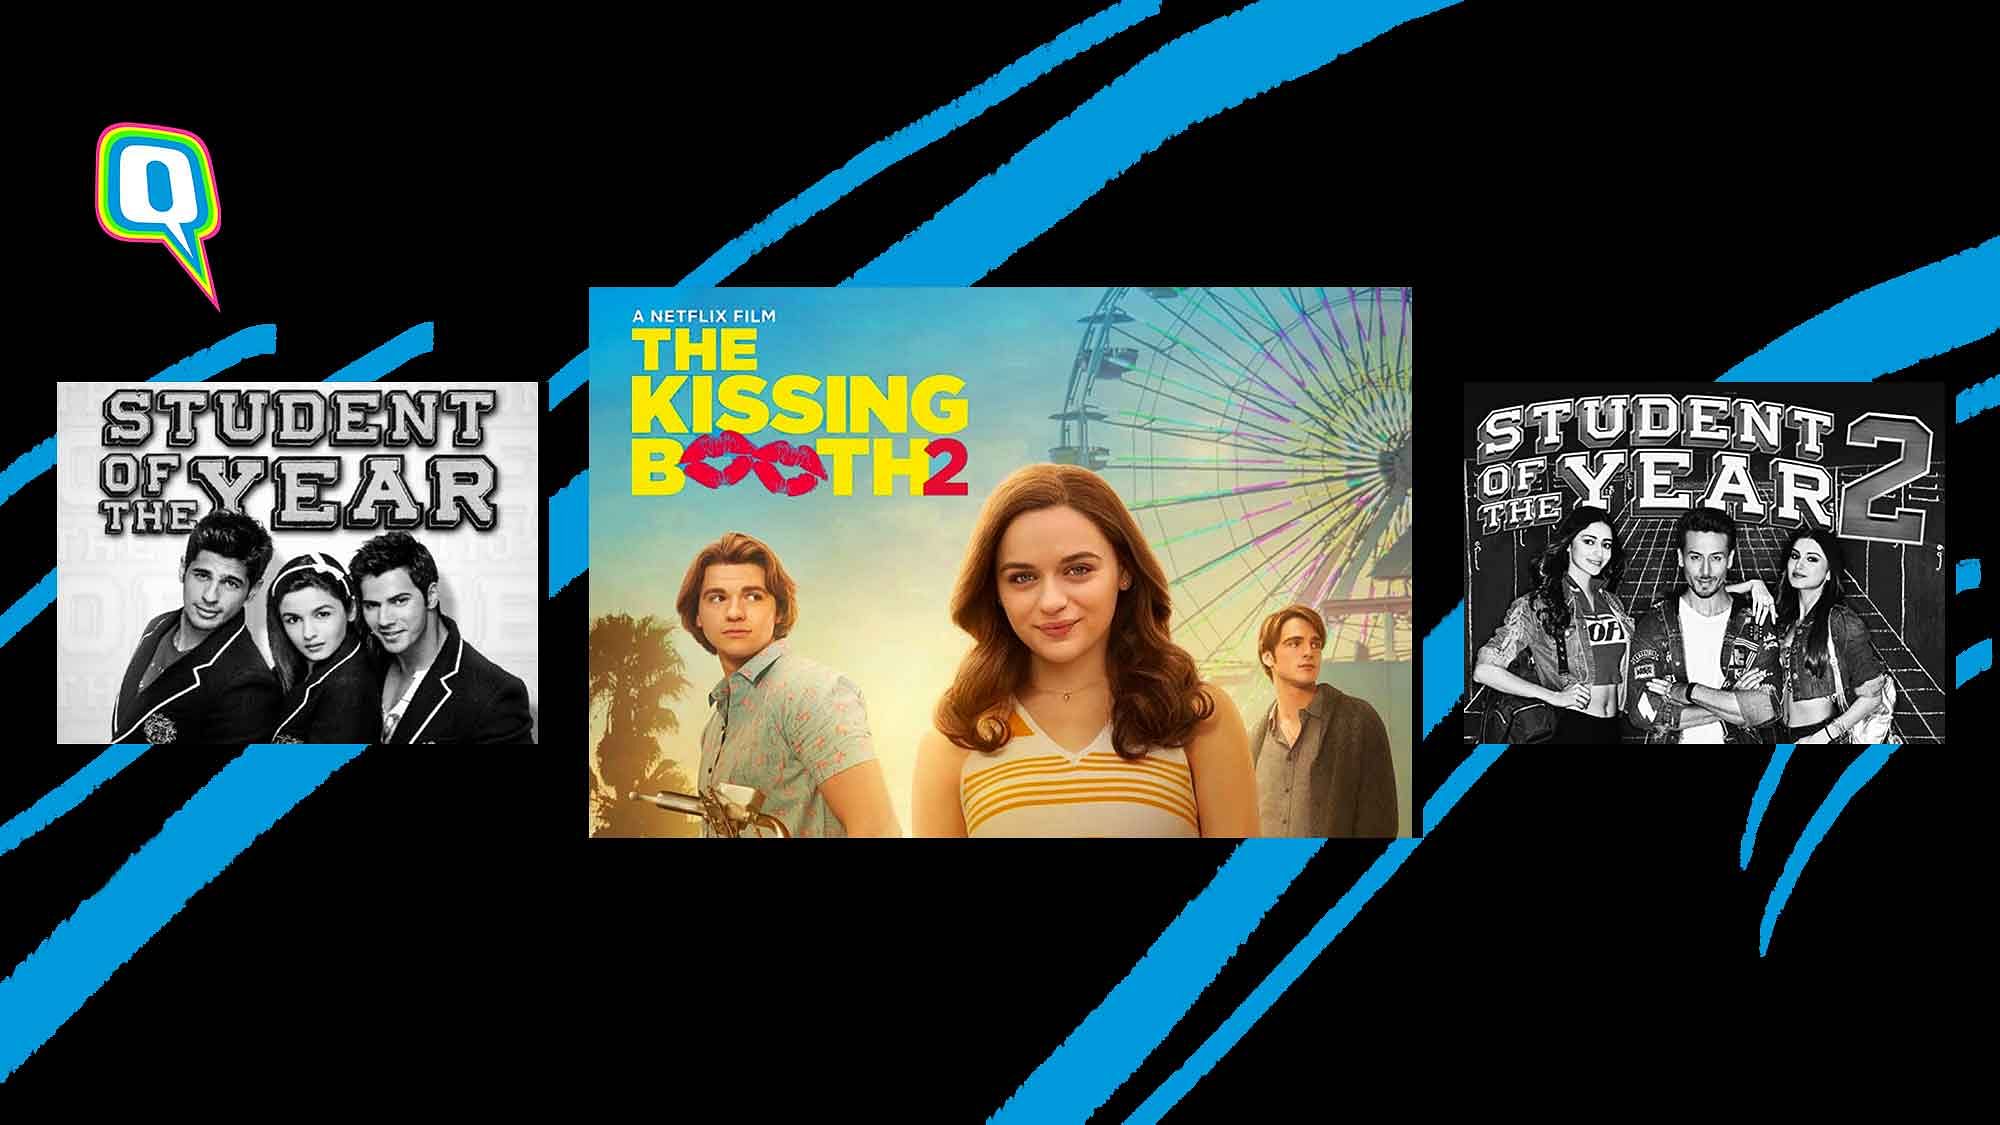 'The Kissing Booth 2' is streaming on Netflix.